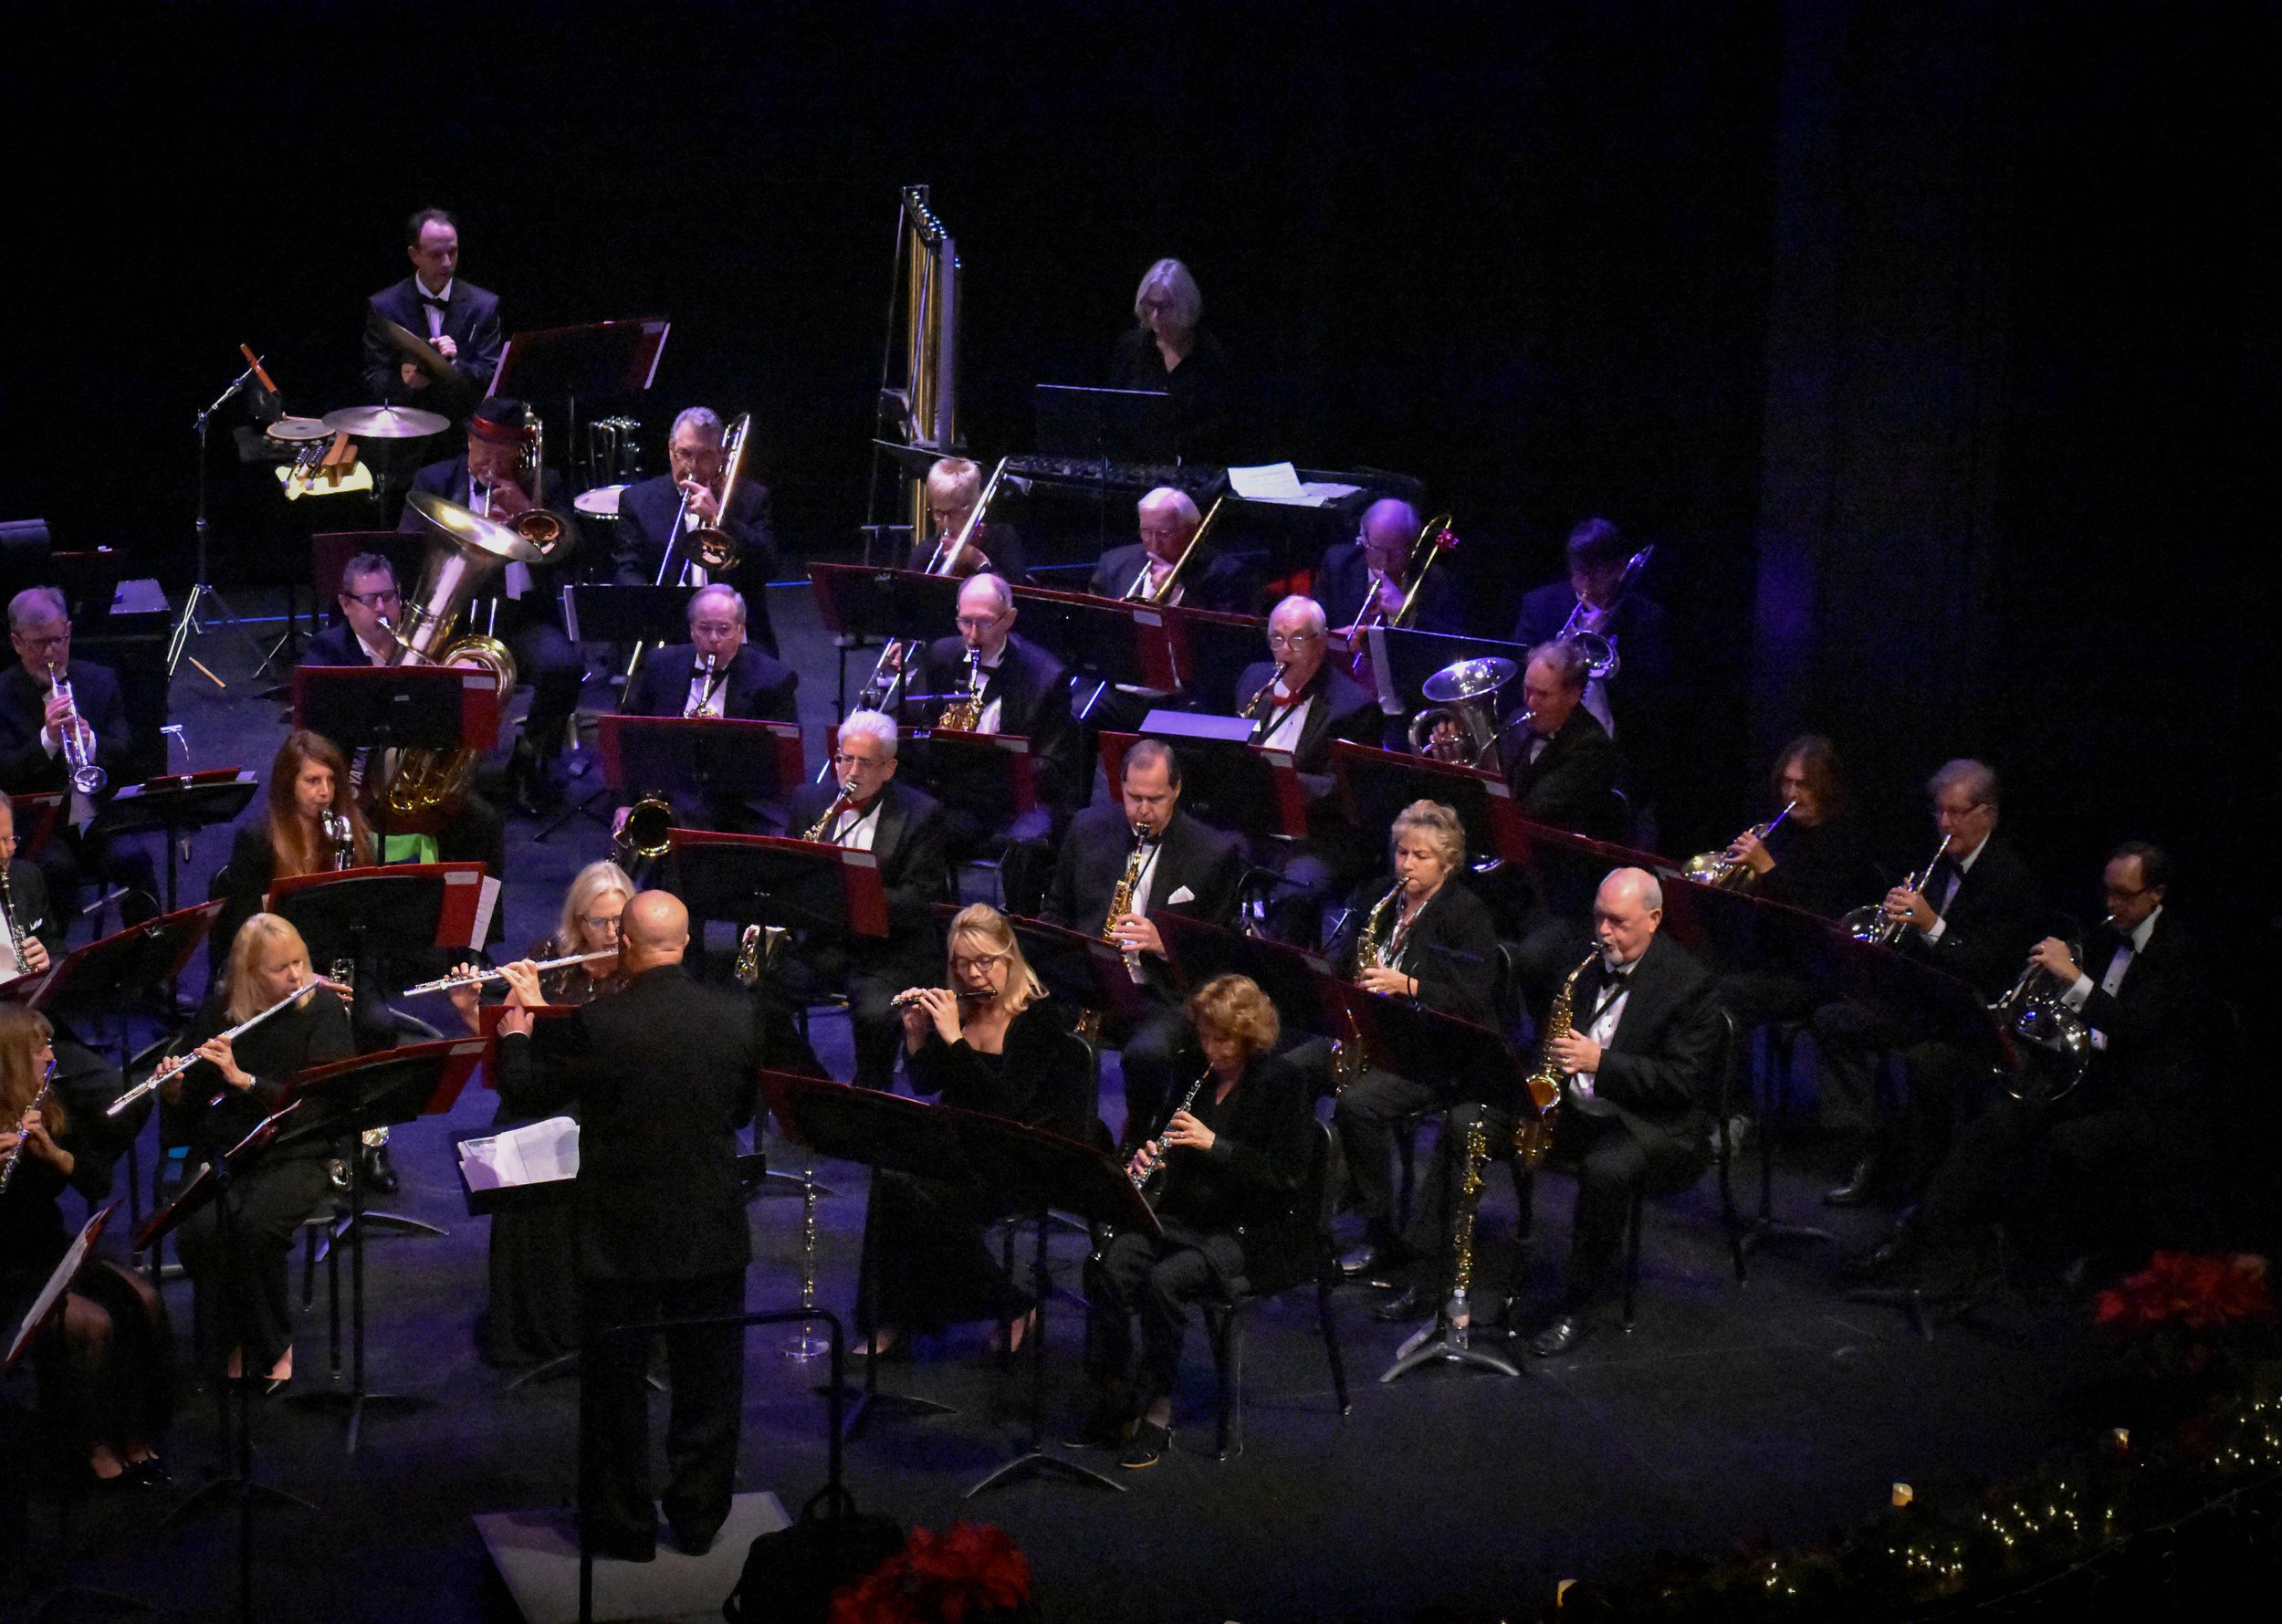 12-19-2021 LCB Holiday Concert by Peyton Webster38-21.jpg